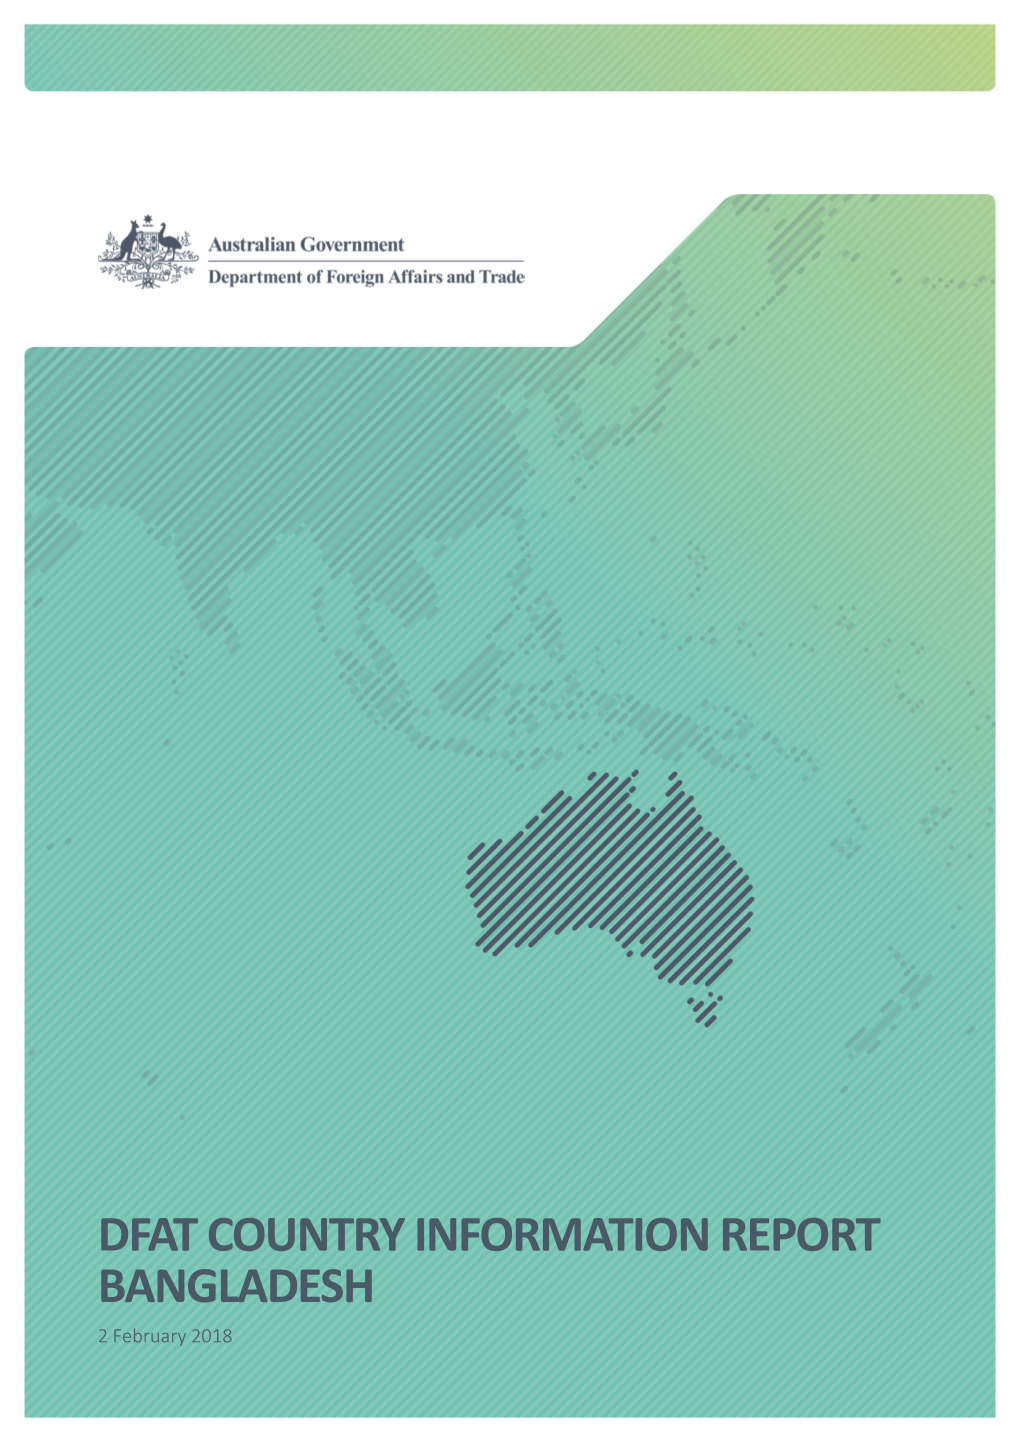 DFAT COUNTRY INFORMATION REPORT BANGLADESH 2 February 2018